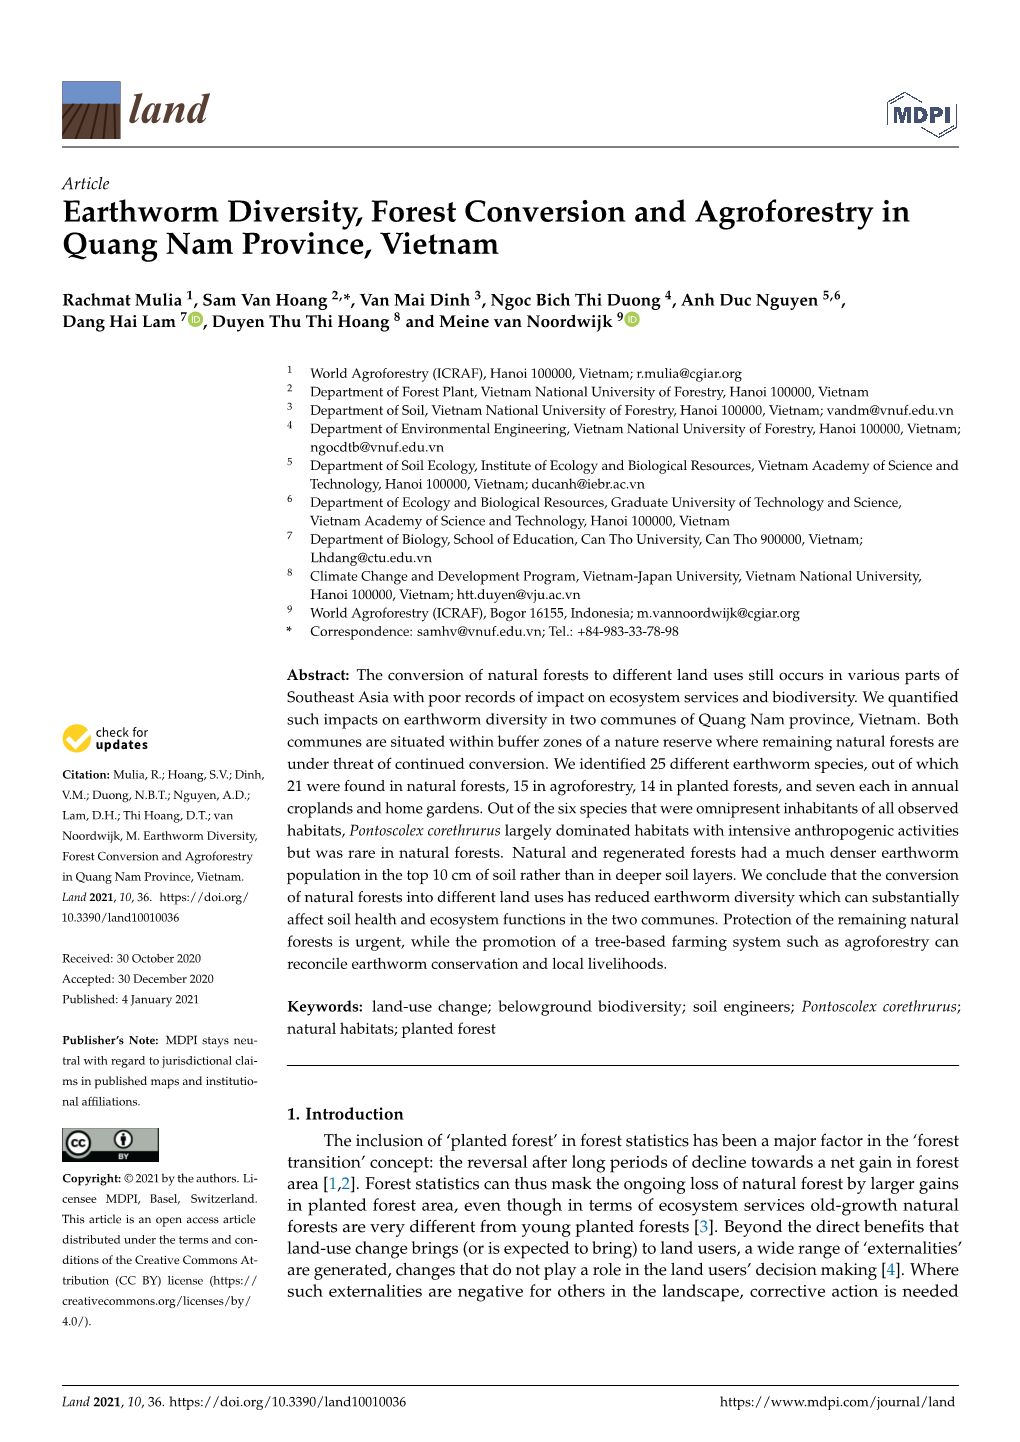 Earthworm Diversity, Forest Conversion and Agroforestry in Quang Nam Province, Vietnam